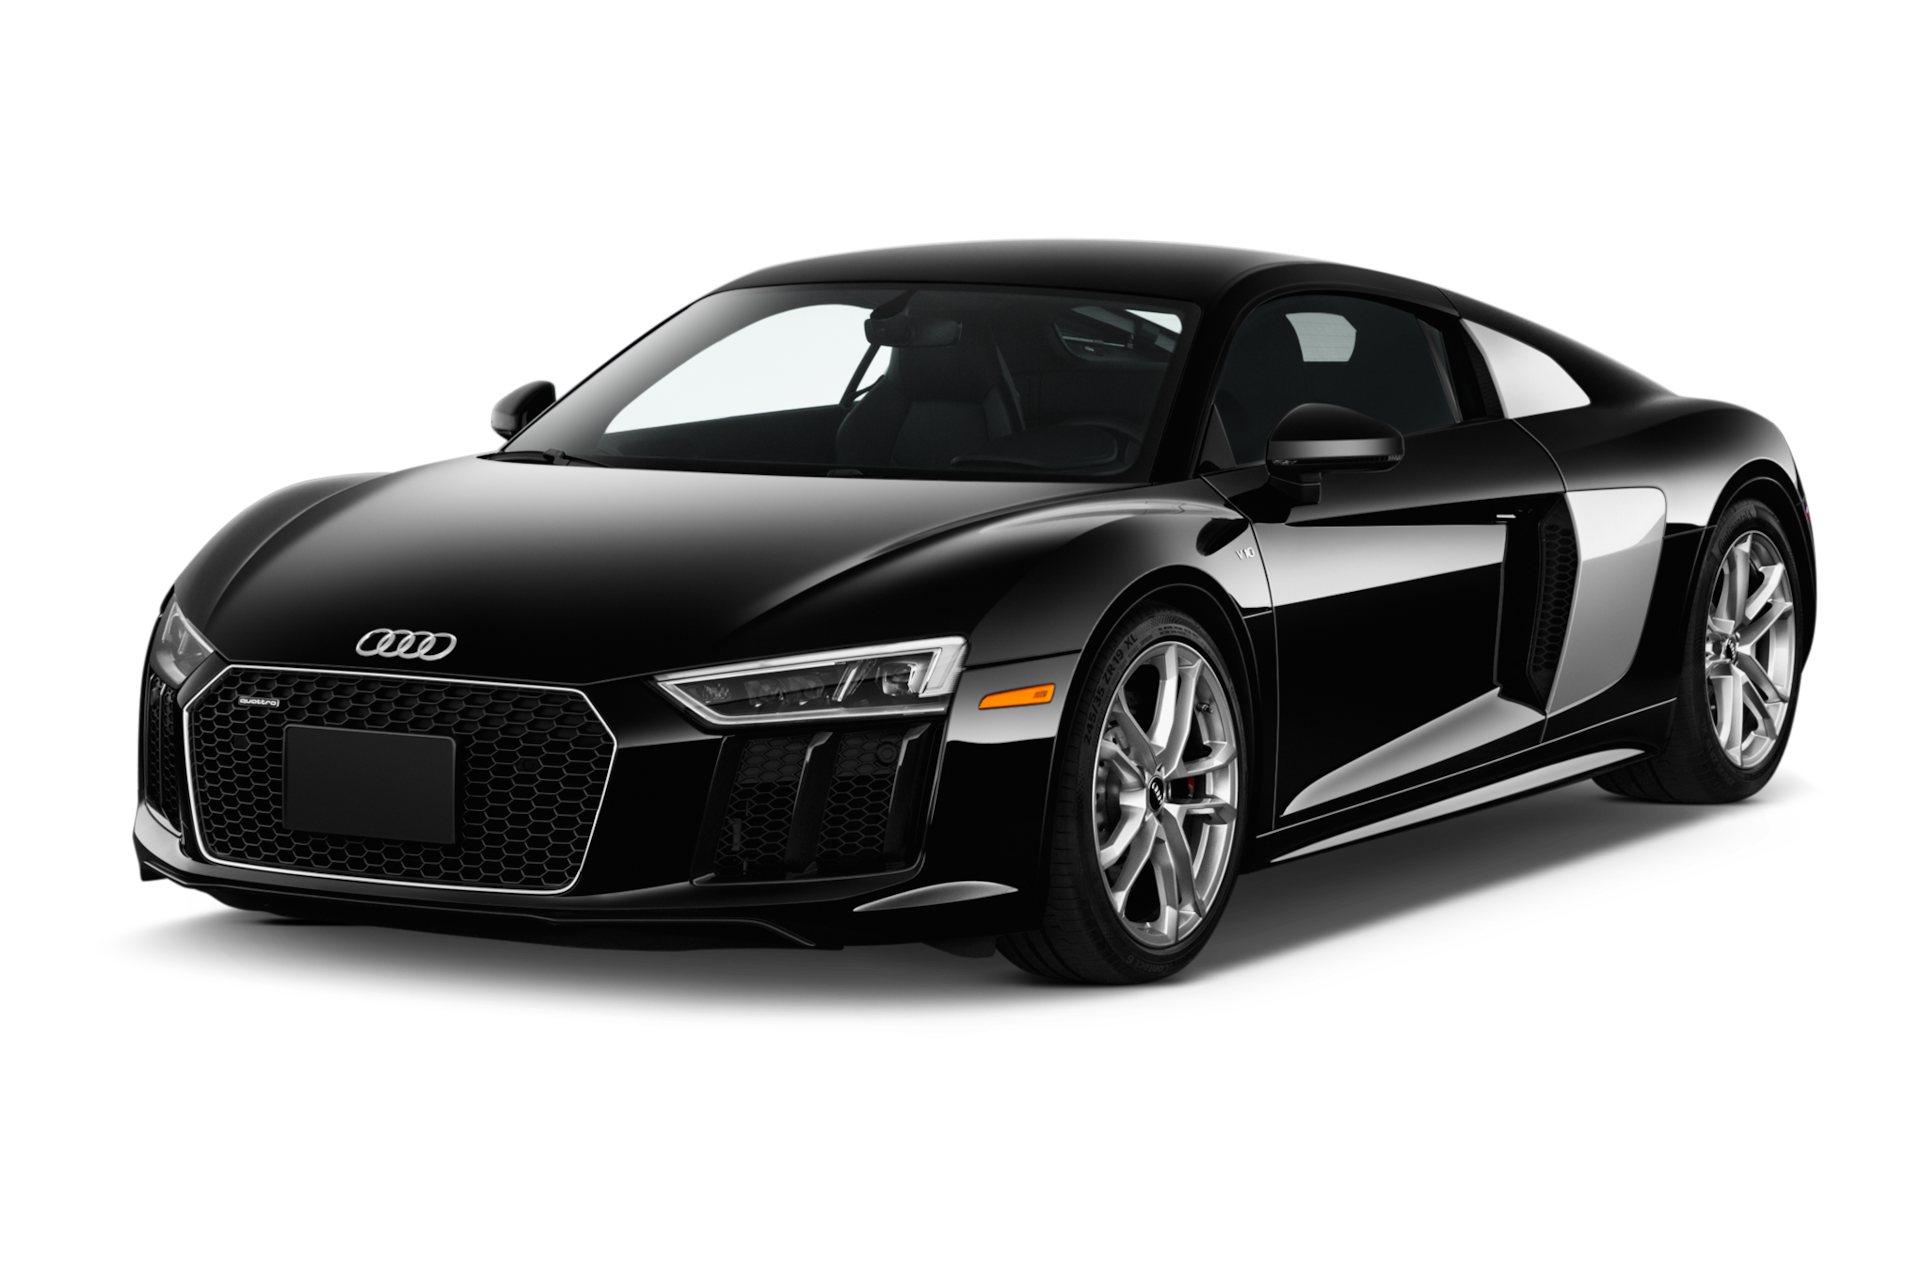 2017 Audi R8 Prices, Reviews, and Photos - MotorTrend